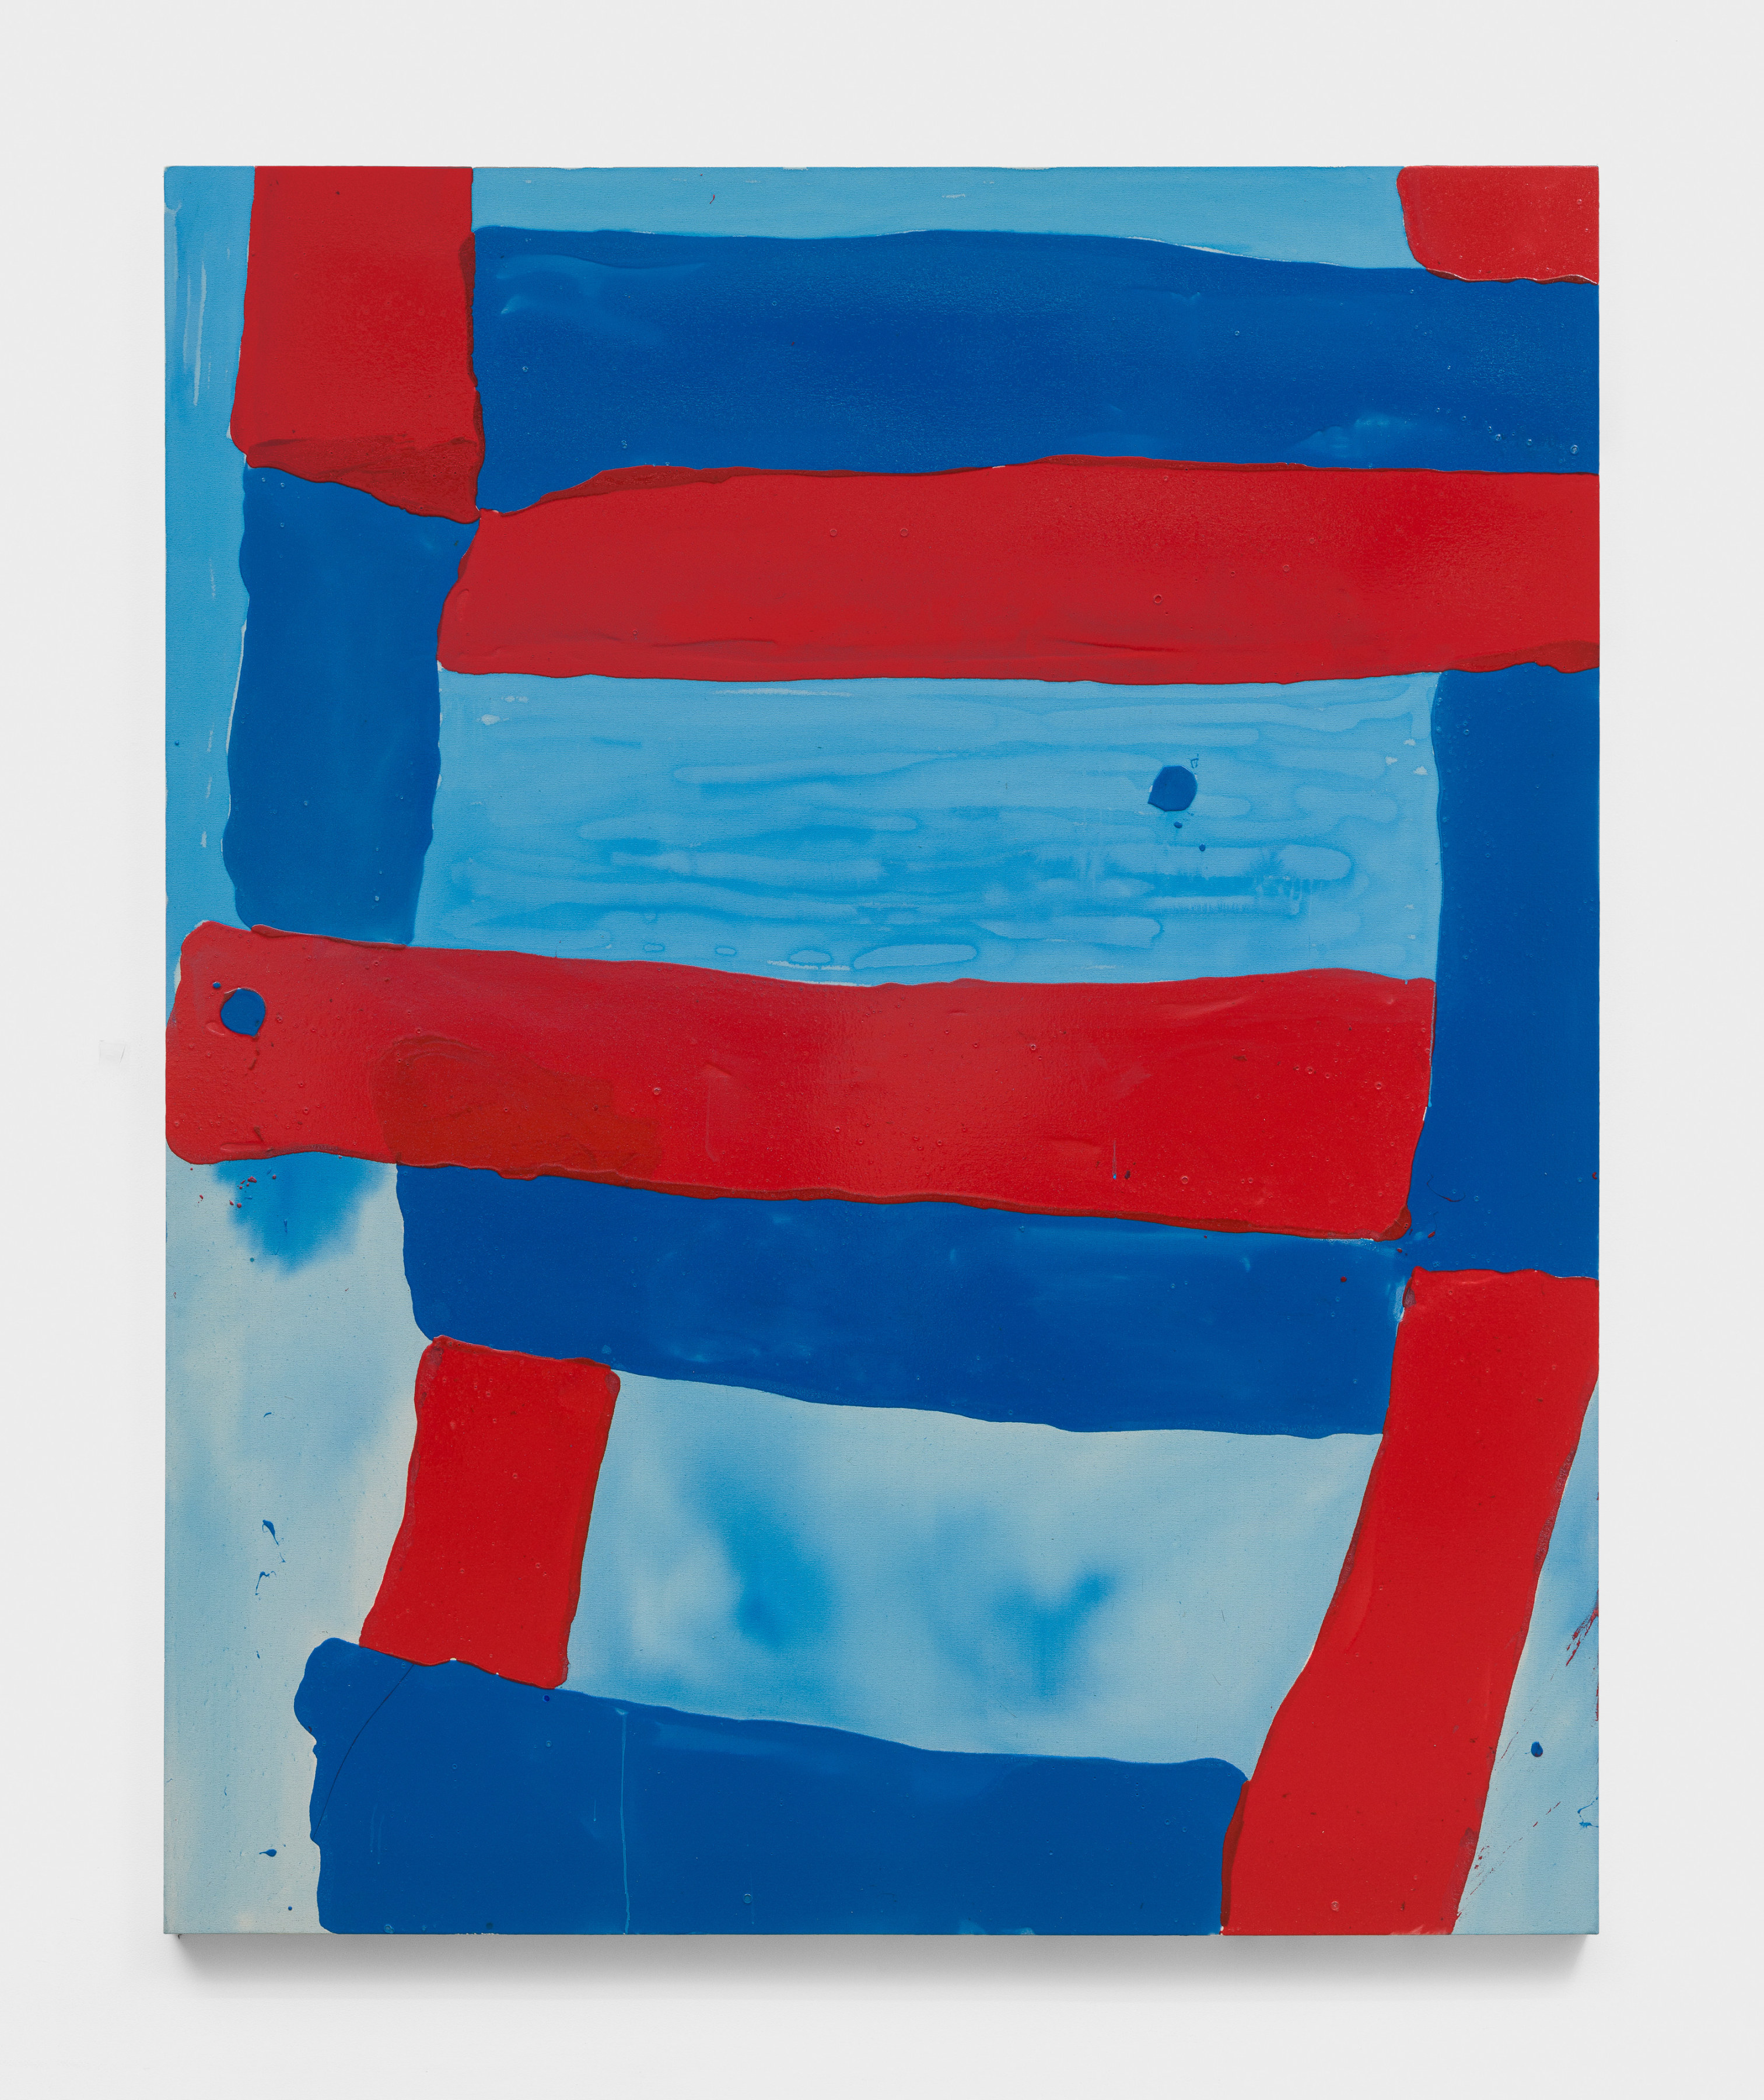 A painting with colorful rectangular swatches of primary red and blue.